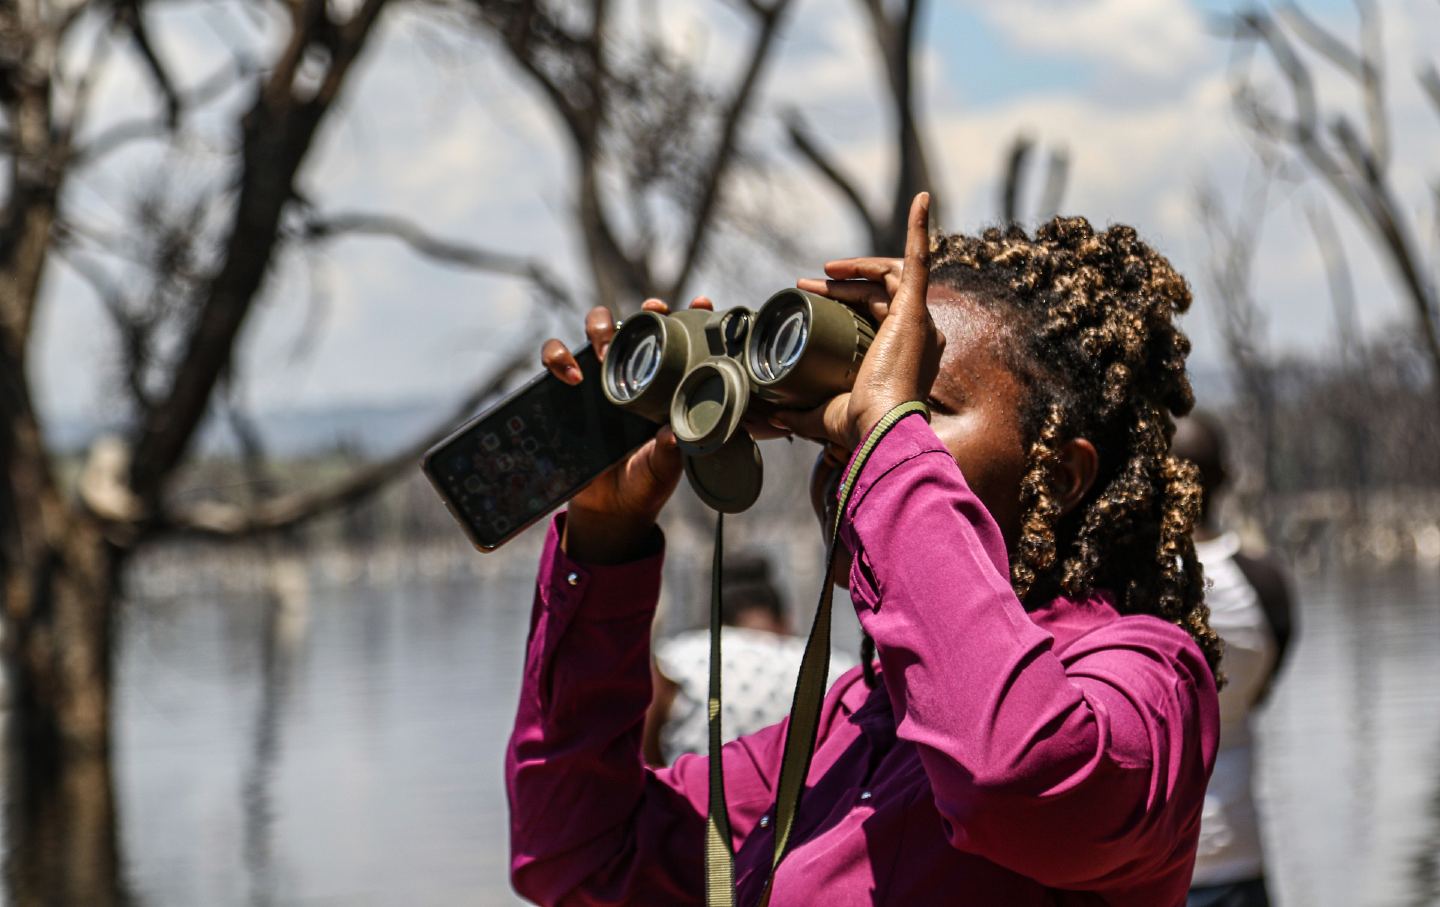 A journalist using binoculars during an event to understand the impact of climate change on biodiversity in Kenya's Lake Nakuru National Park